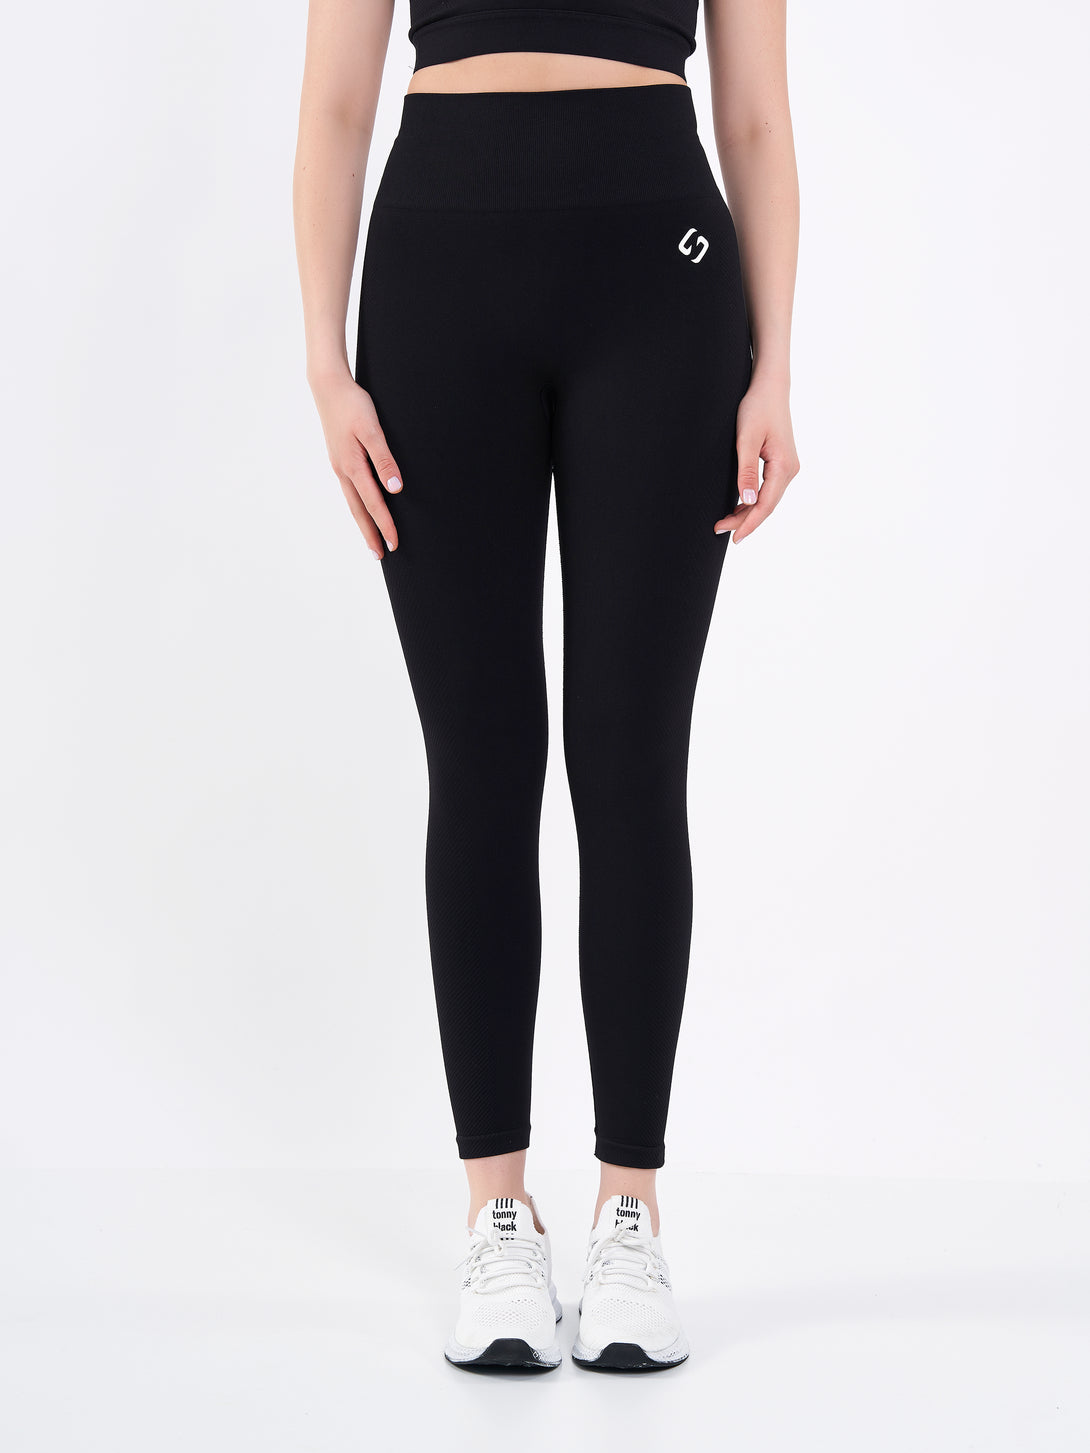 A Woman Wearing Deep Black Color Zen Perfect Seamless High-Waist Ankle-Length Leggings. Perfect Fit